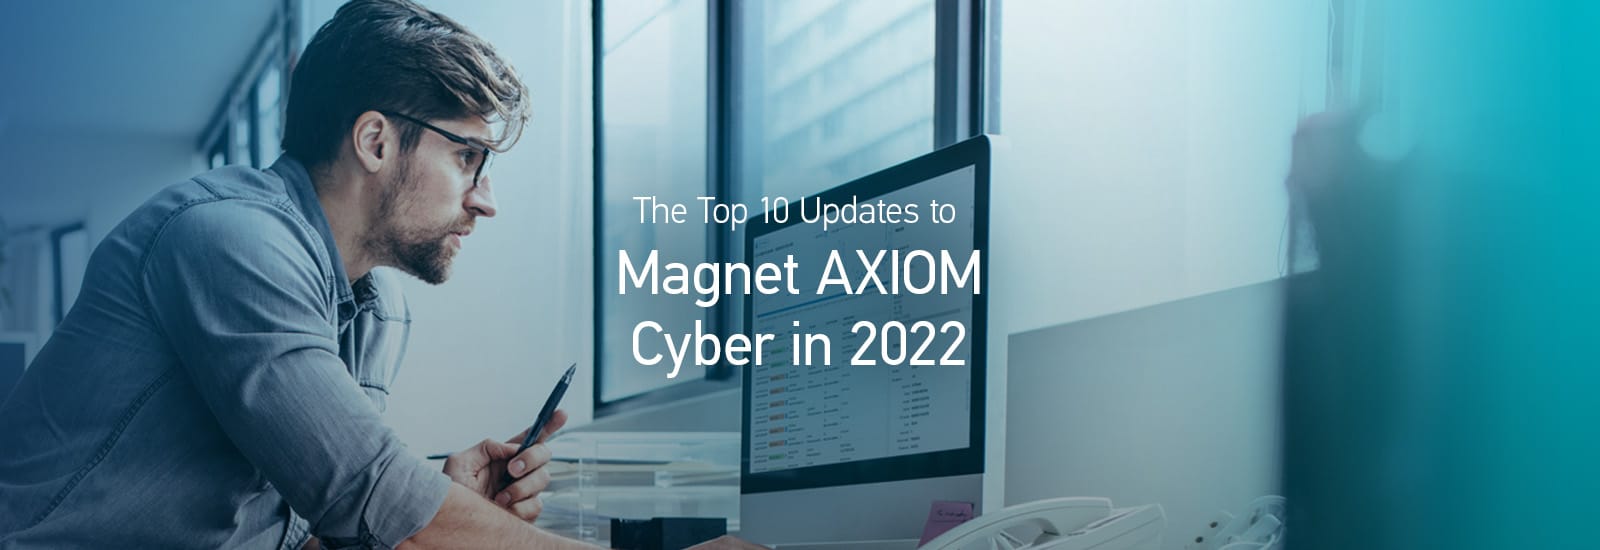 A decorative header for the Magnet AXIOM Cyber in 2022 wrap-up blog